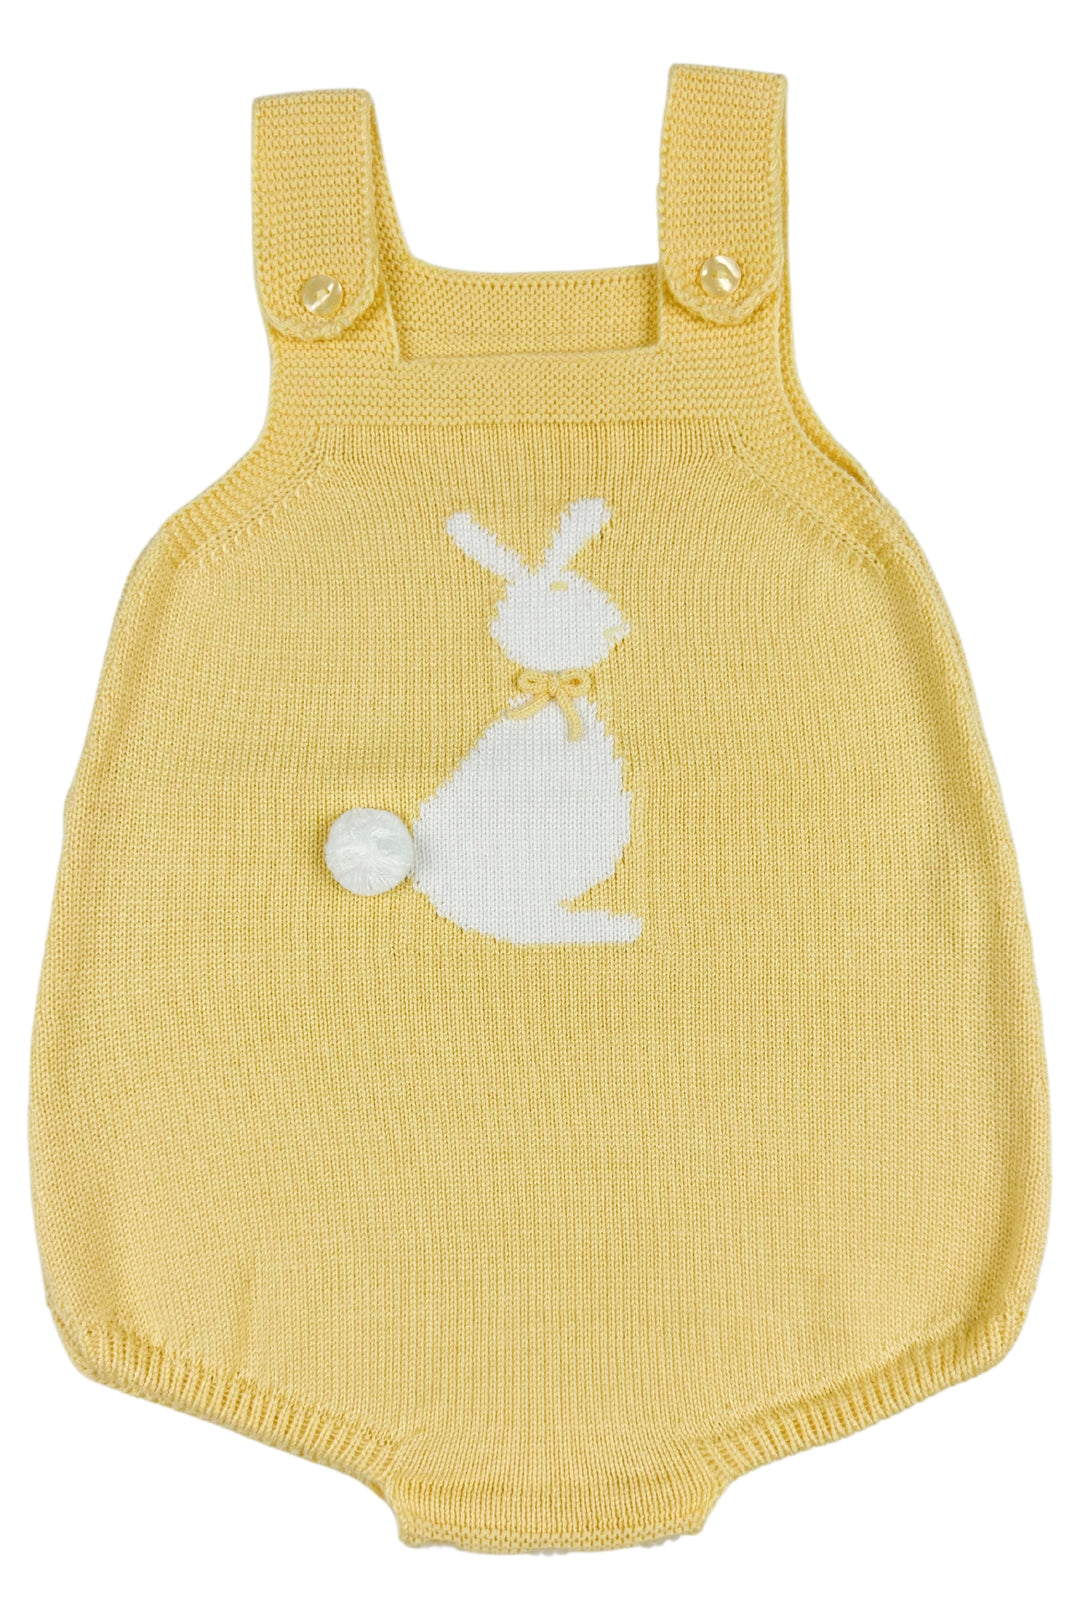 Granlei "Roux" Pale Yellow Knit Bunny Dungaree Romper | iphoneandroidapplications